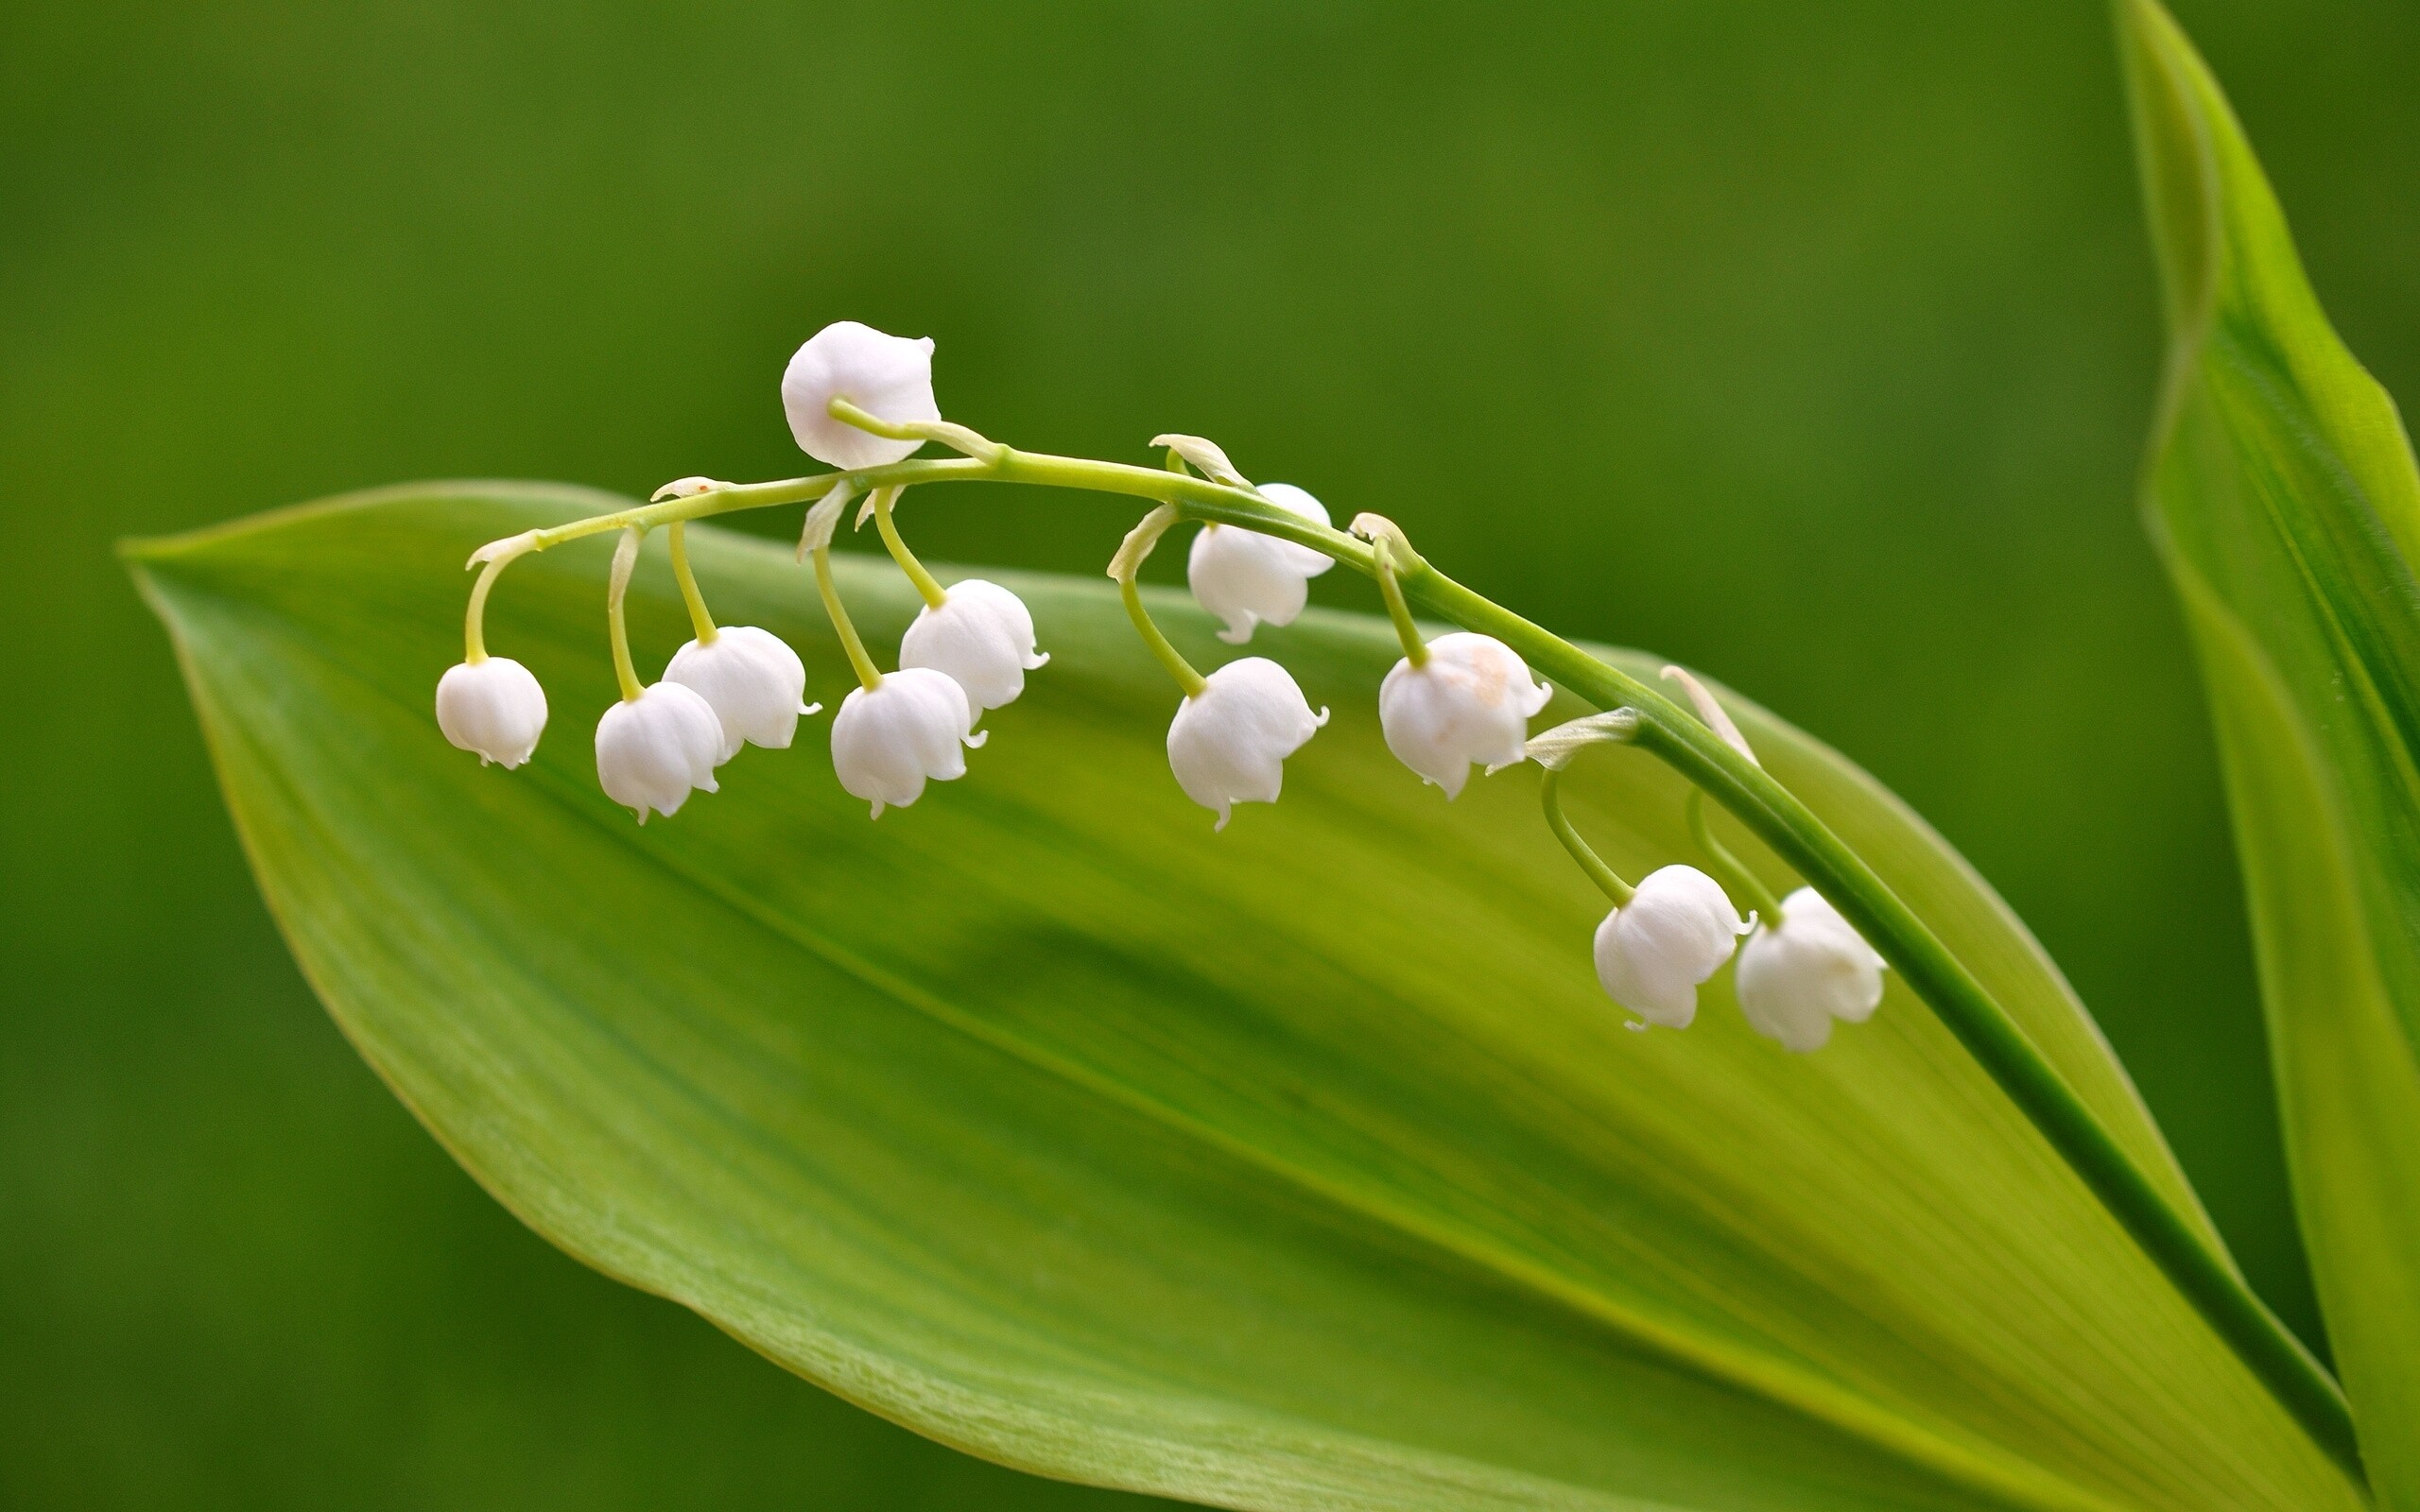 Lily of the Valley: A common symbol in the Christian tradition, many refer to this bloom as “our lady’s tears,” deriving from the Virgin Mary crying for her crucified Son, Jesus. 2560x1600 HD Wallpaper.